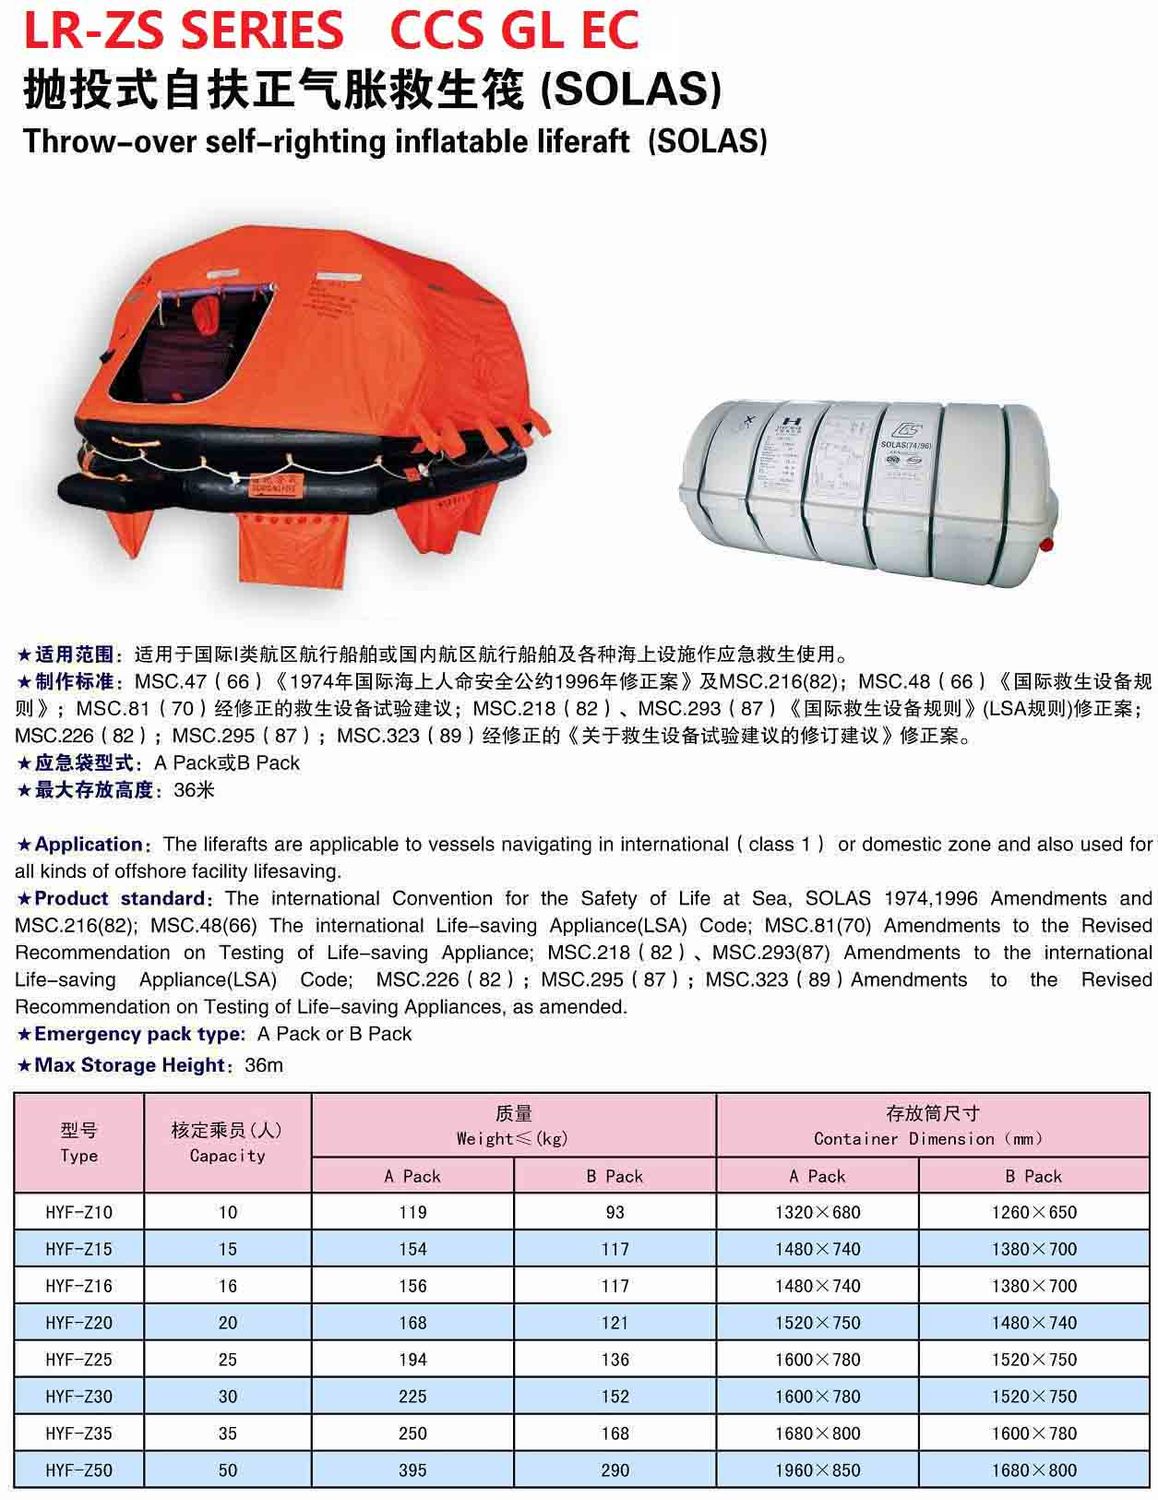 LR-ZS Series Large Throw-overboard Self-righting Inflatable Liferaft